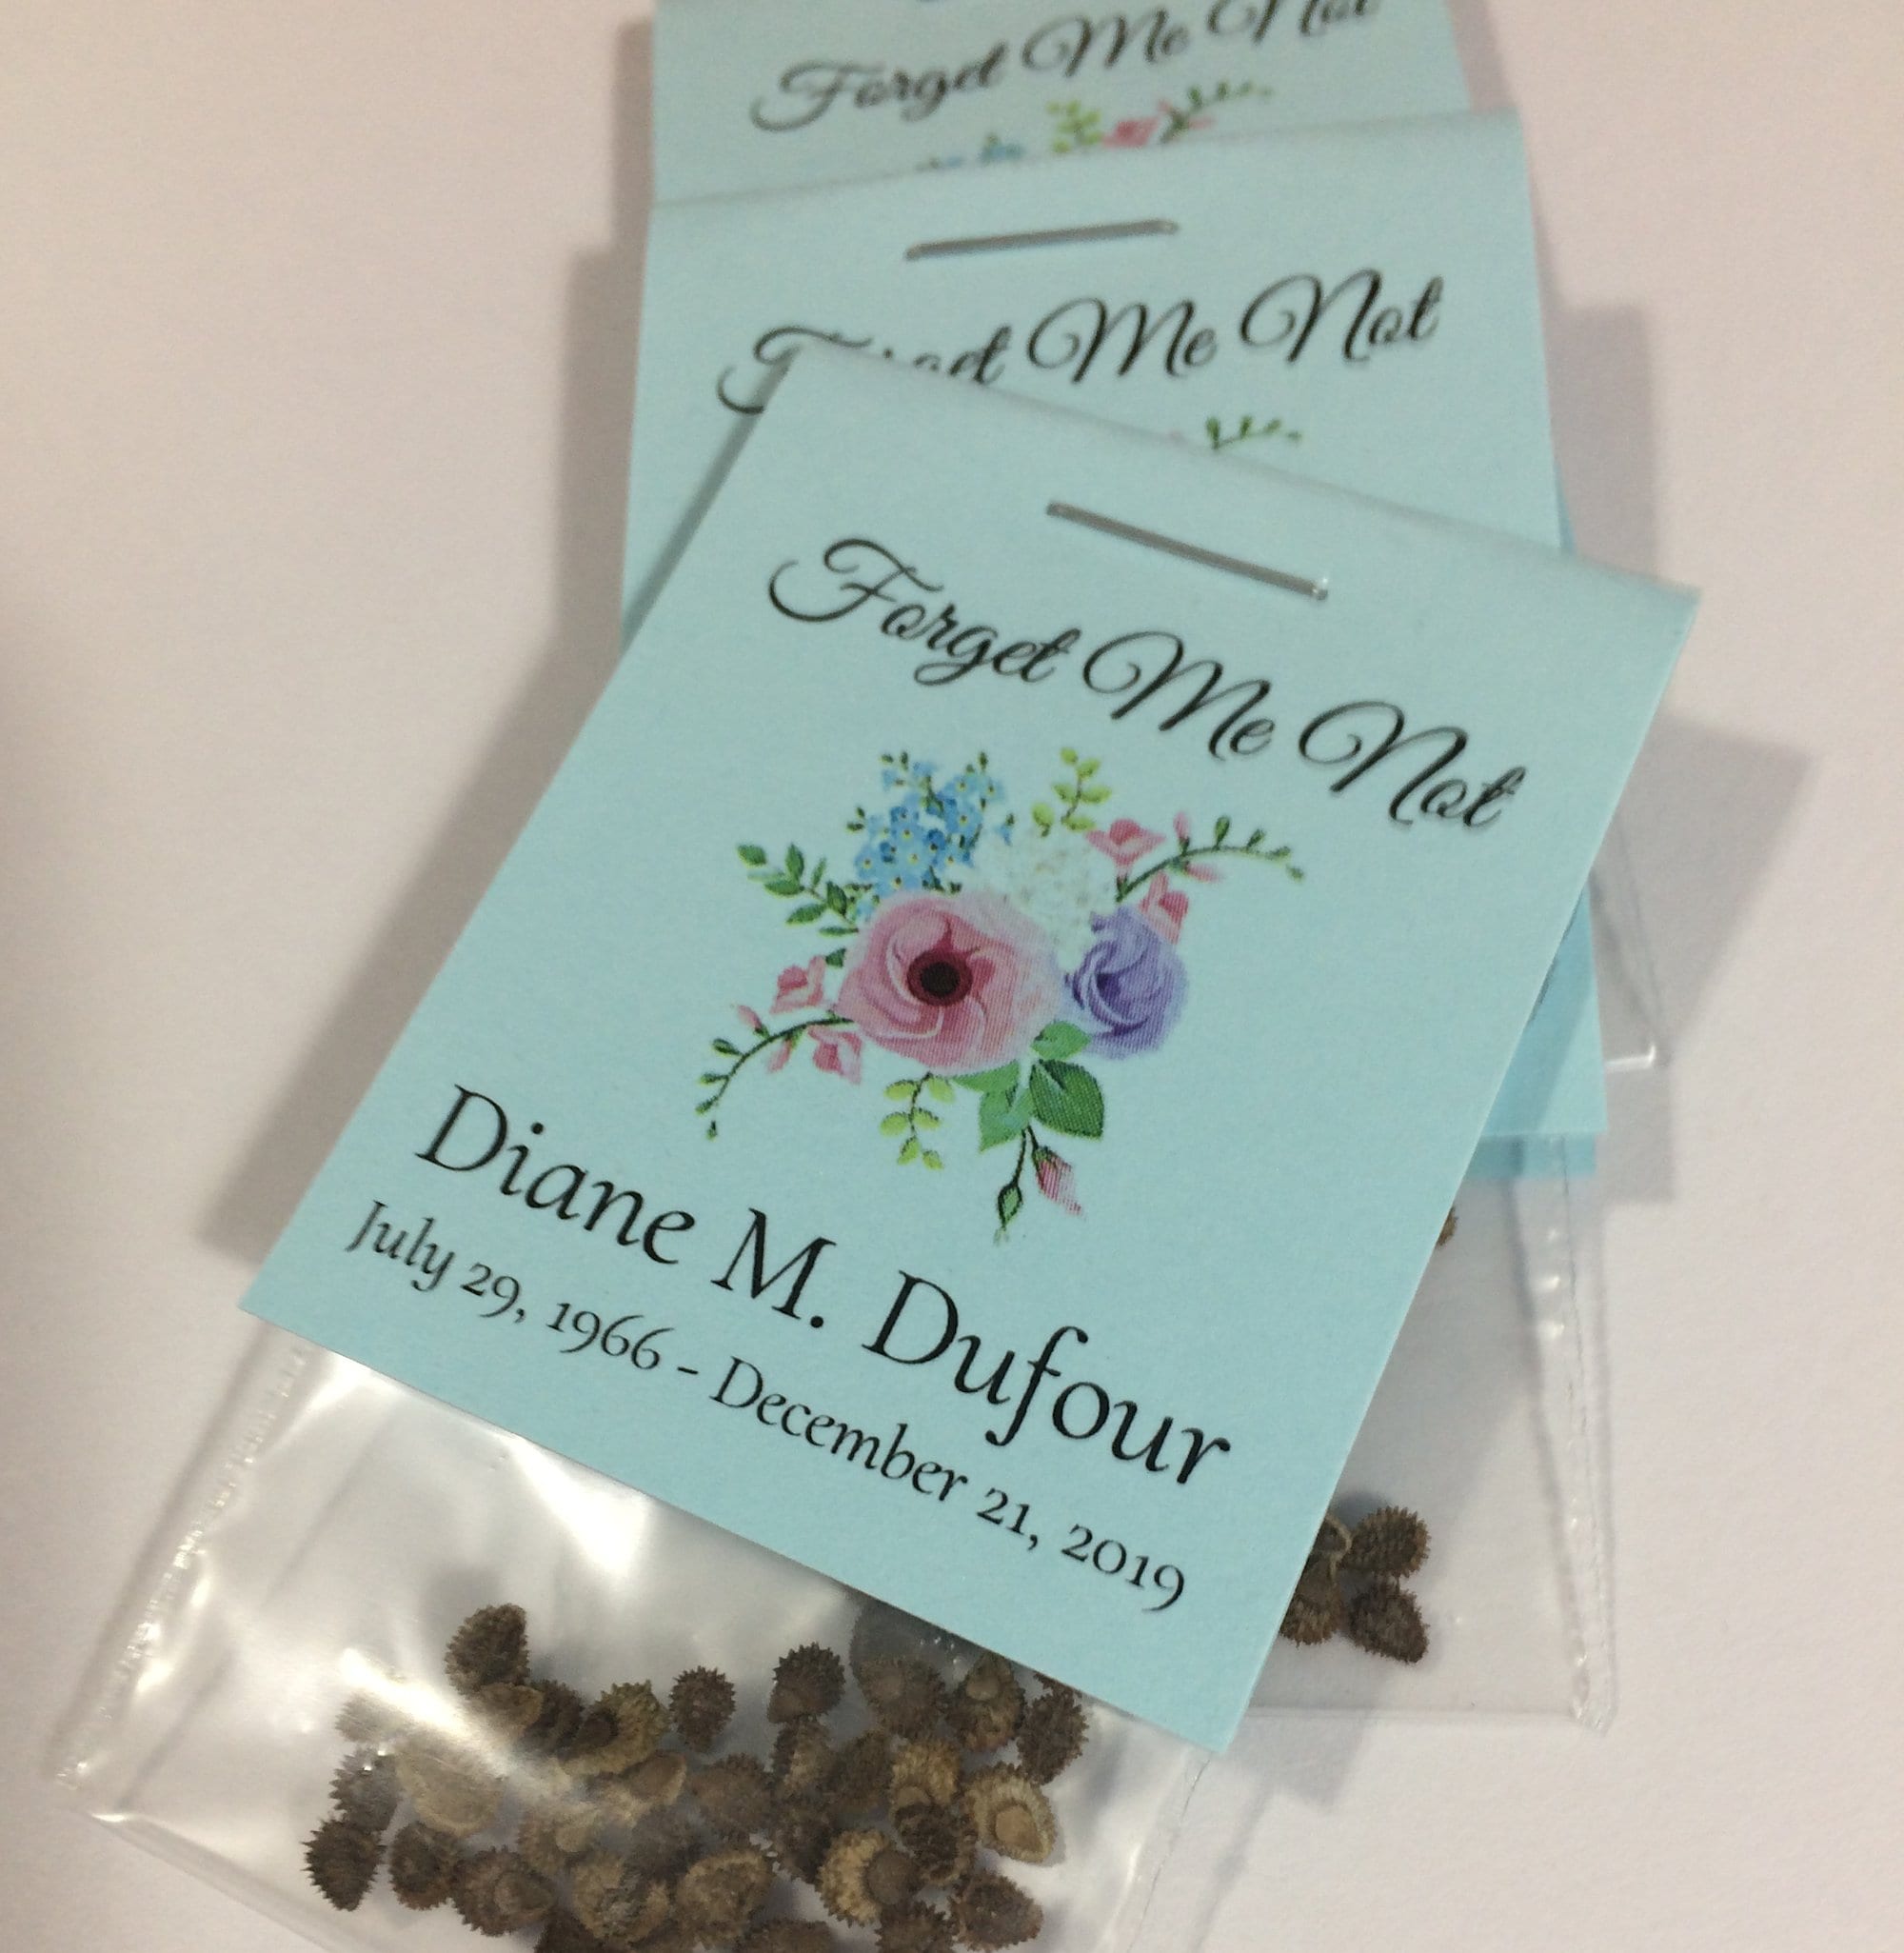 pouches or seed packet favors bereavement forget me not SET OF 10 church in memory of memorial service reception sachets Funeral service